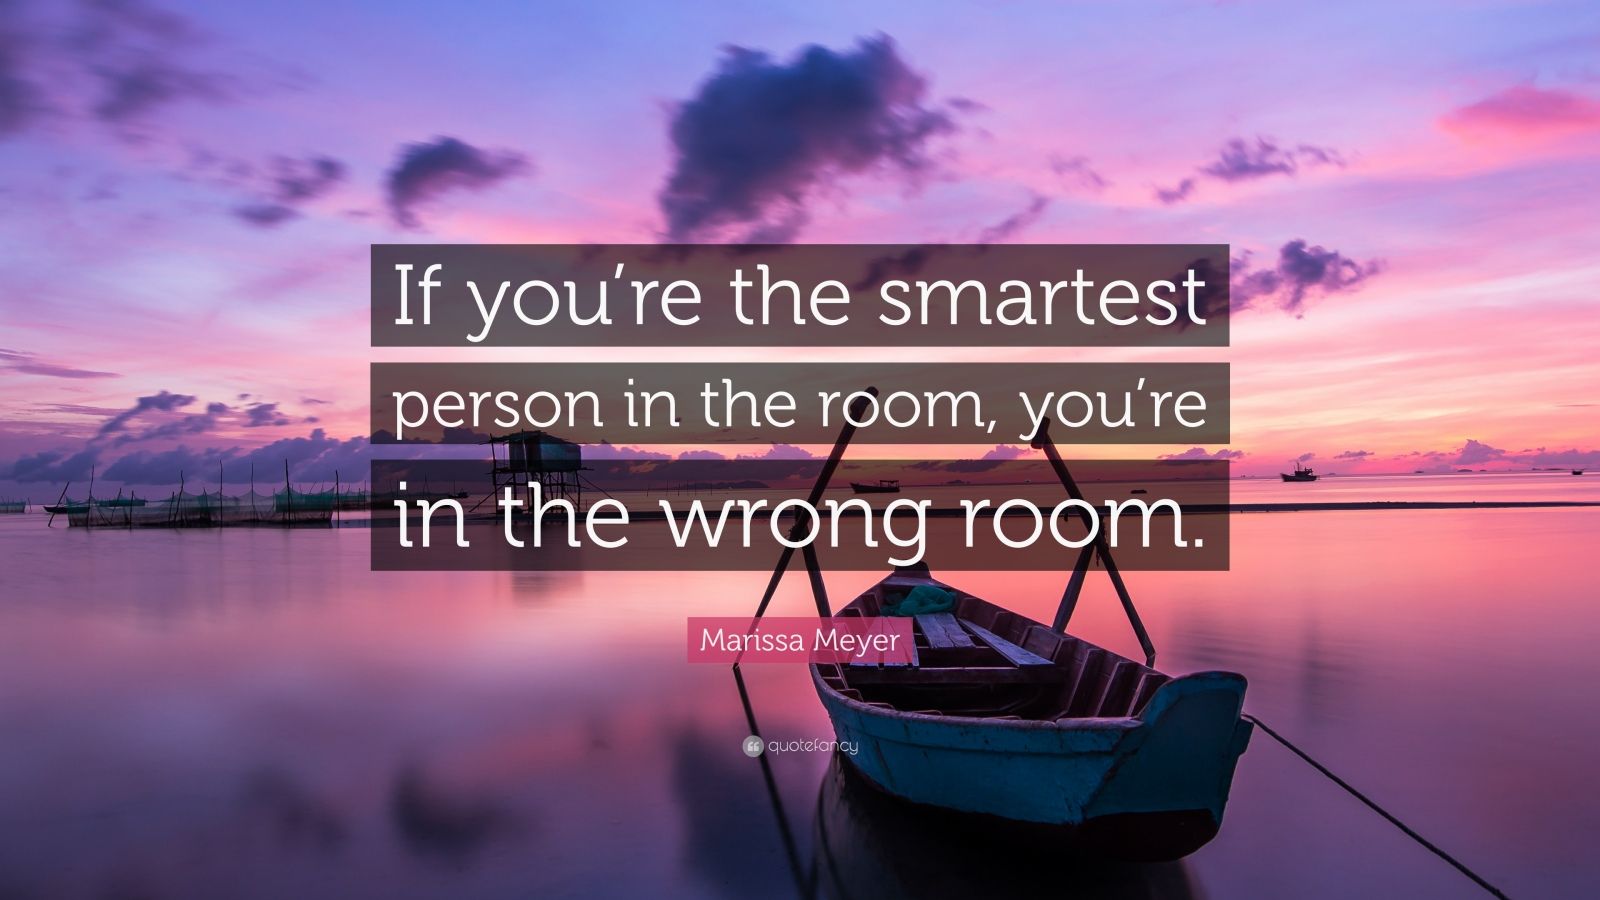 Marissa Meyer Quote “If you’re the smartest person in the